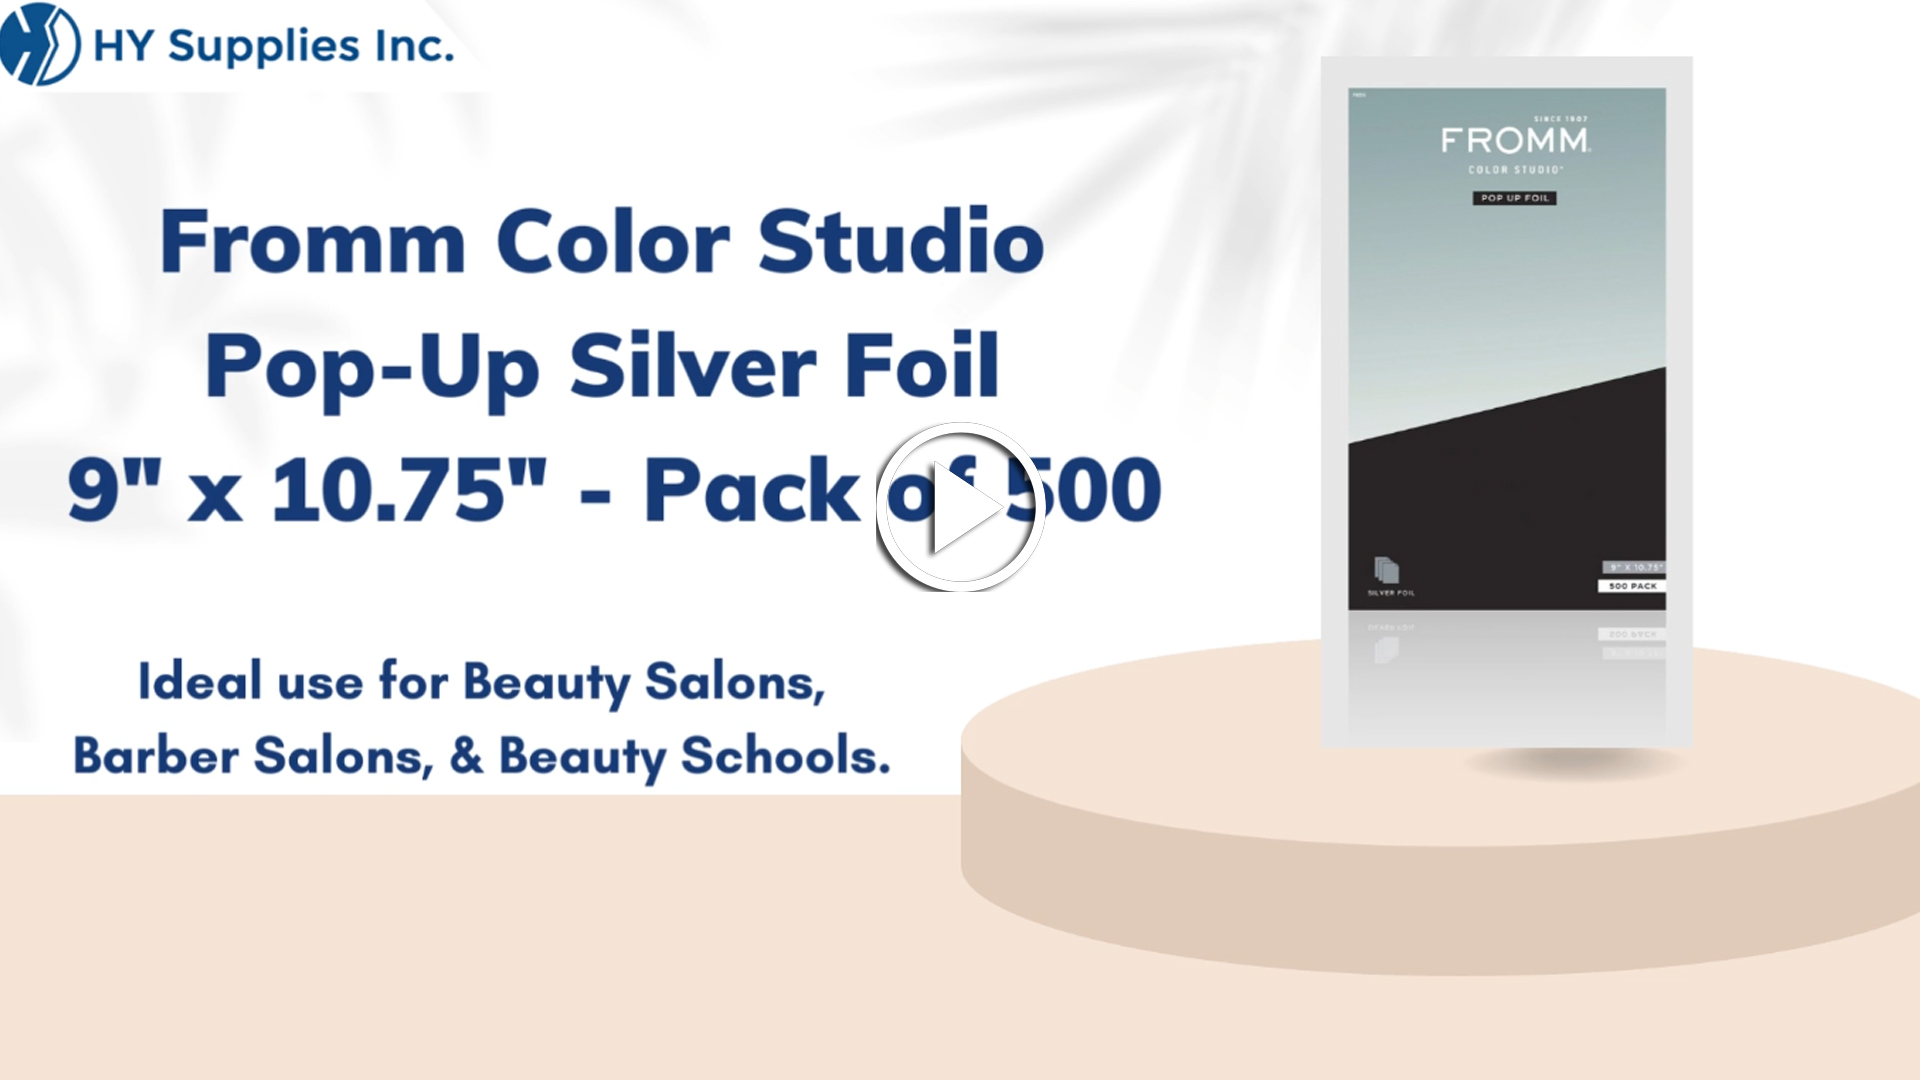 Fromm Color Studio Pop-Up Silver Foil 9"" x 10.75" - Pack of 500